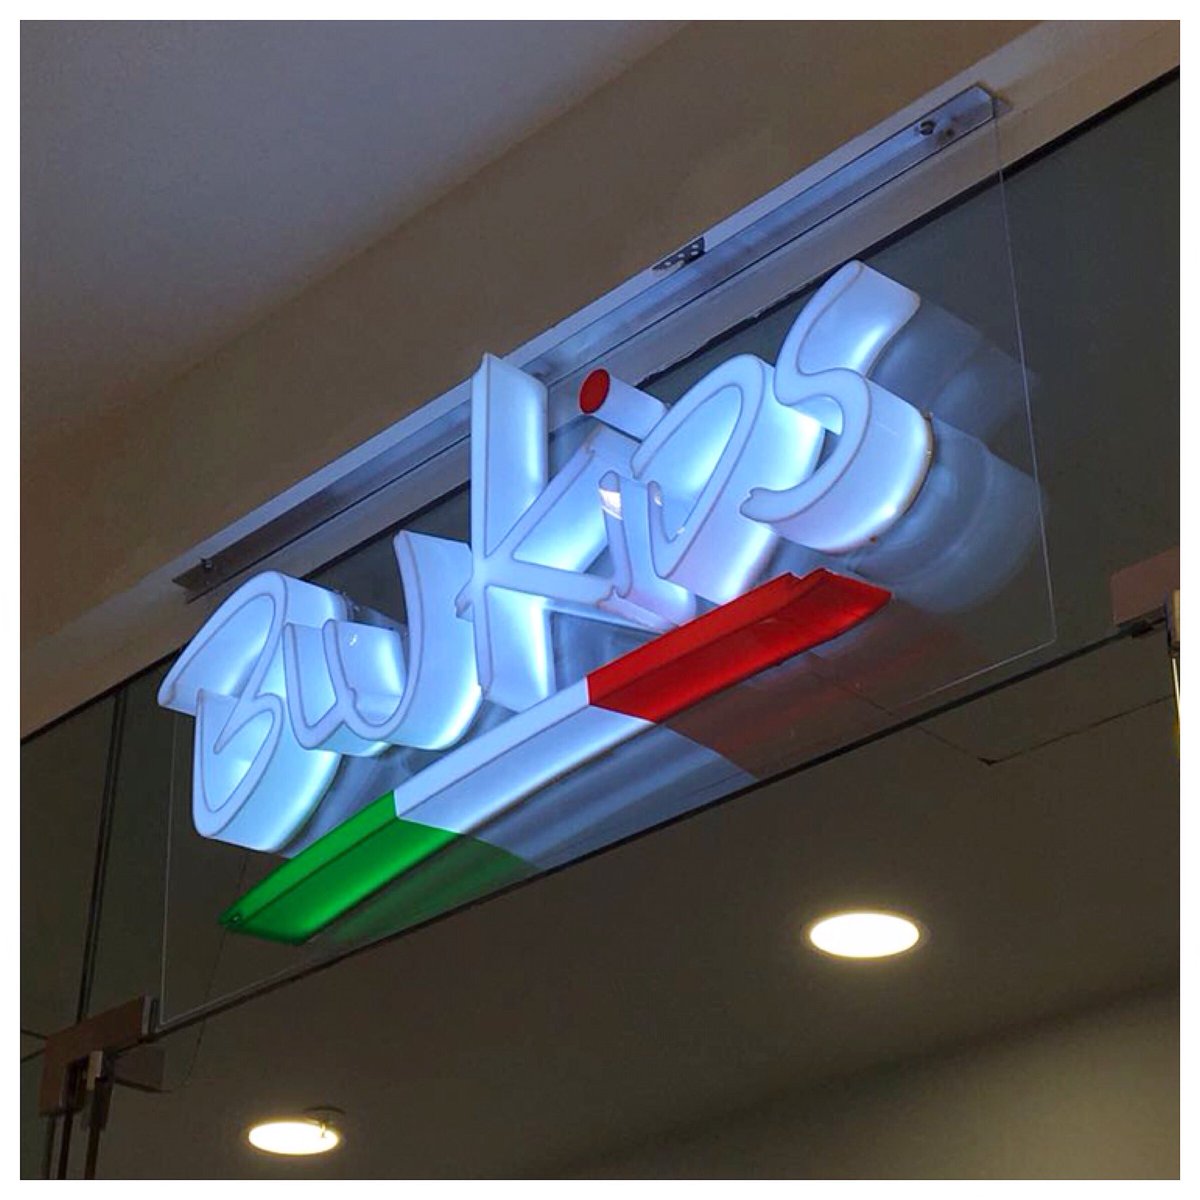 Another beautiful illuminated sign installed for BluKids at their new Cresta store. This sign has an aluminum extrusion allowing it to be suspended from the bulkhead. 

#FinelineDesignSA #Signage #Branding #RetailSignage #IlluminatedSign #3DLettering

finelinedesign.co.za